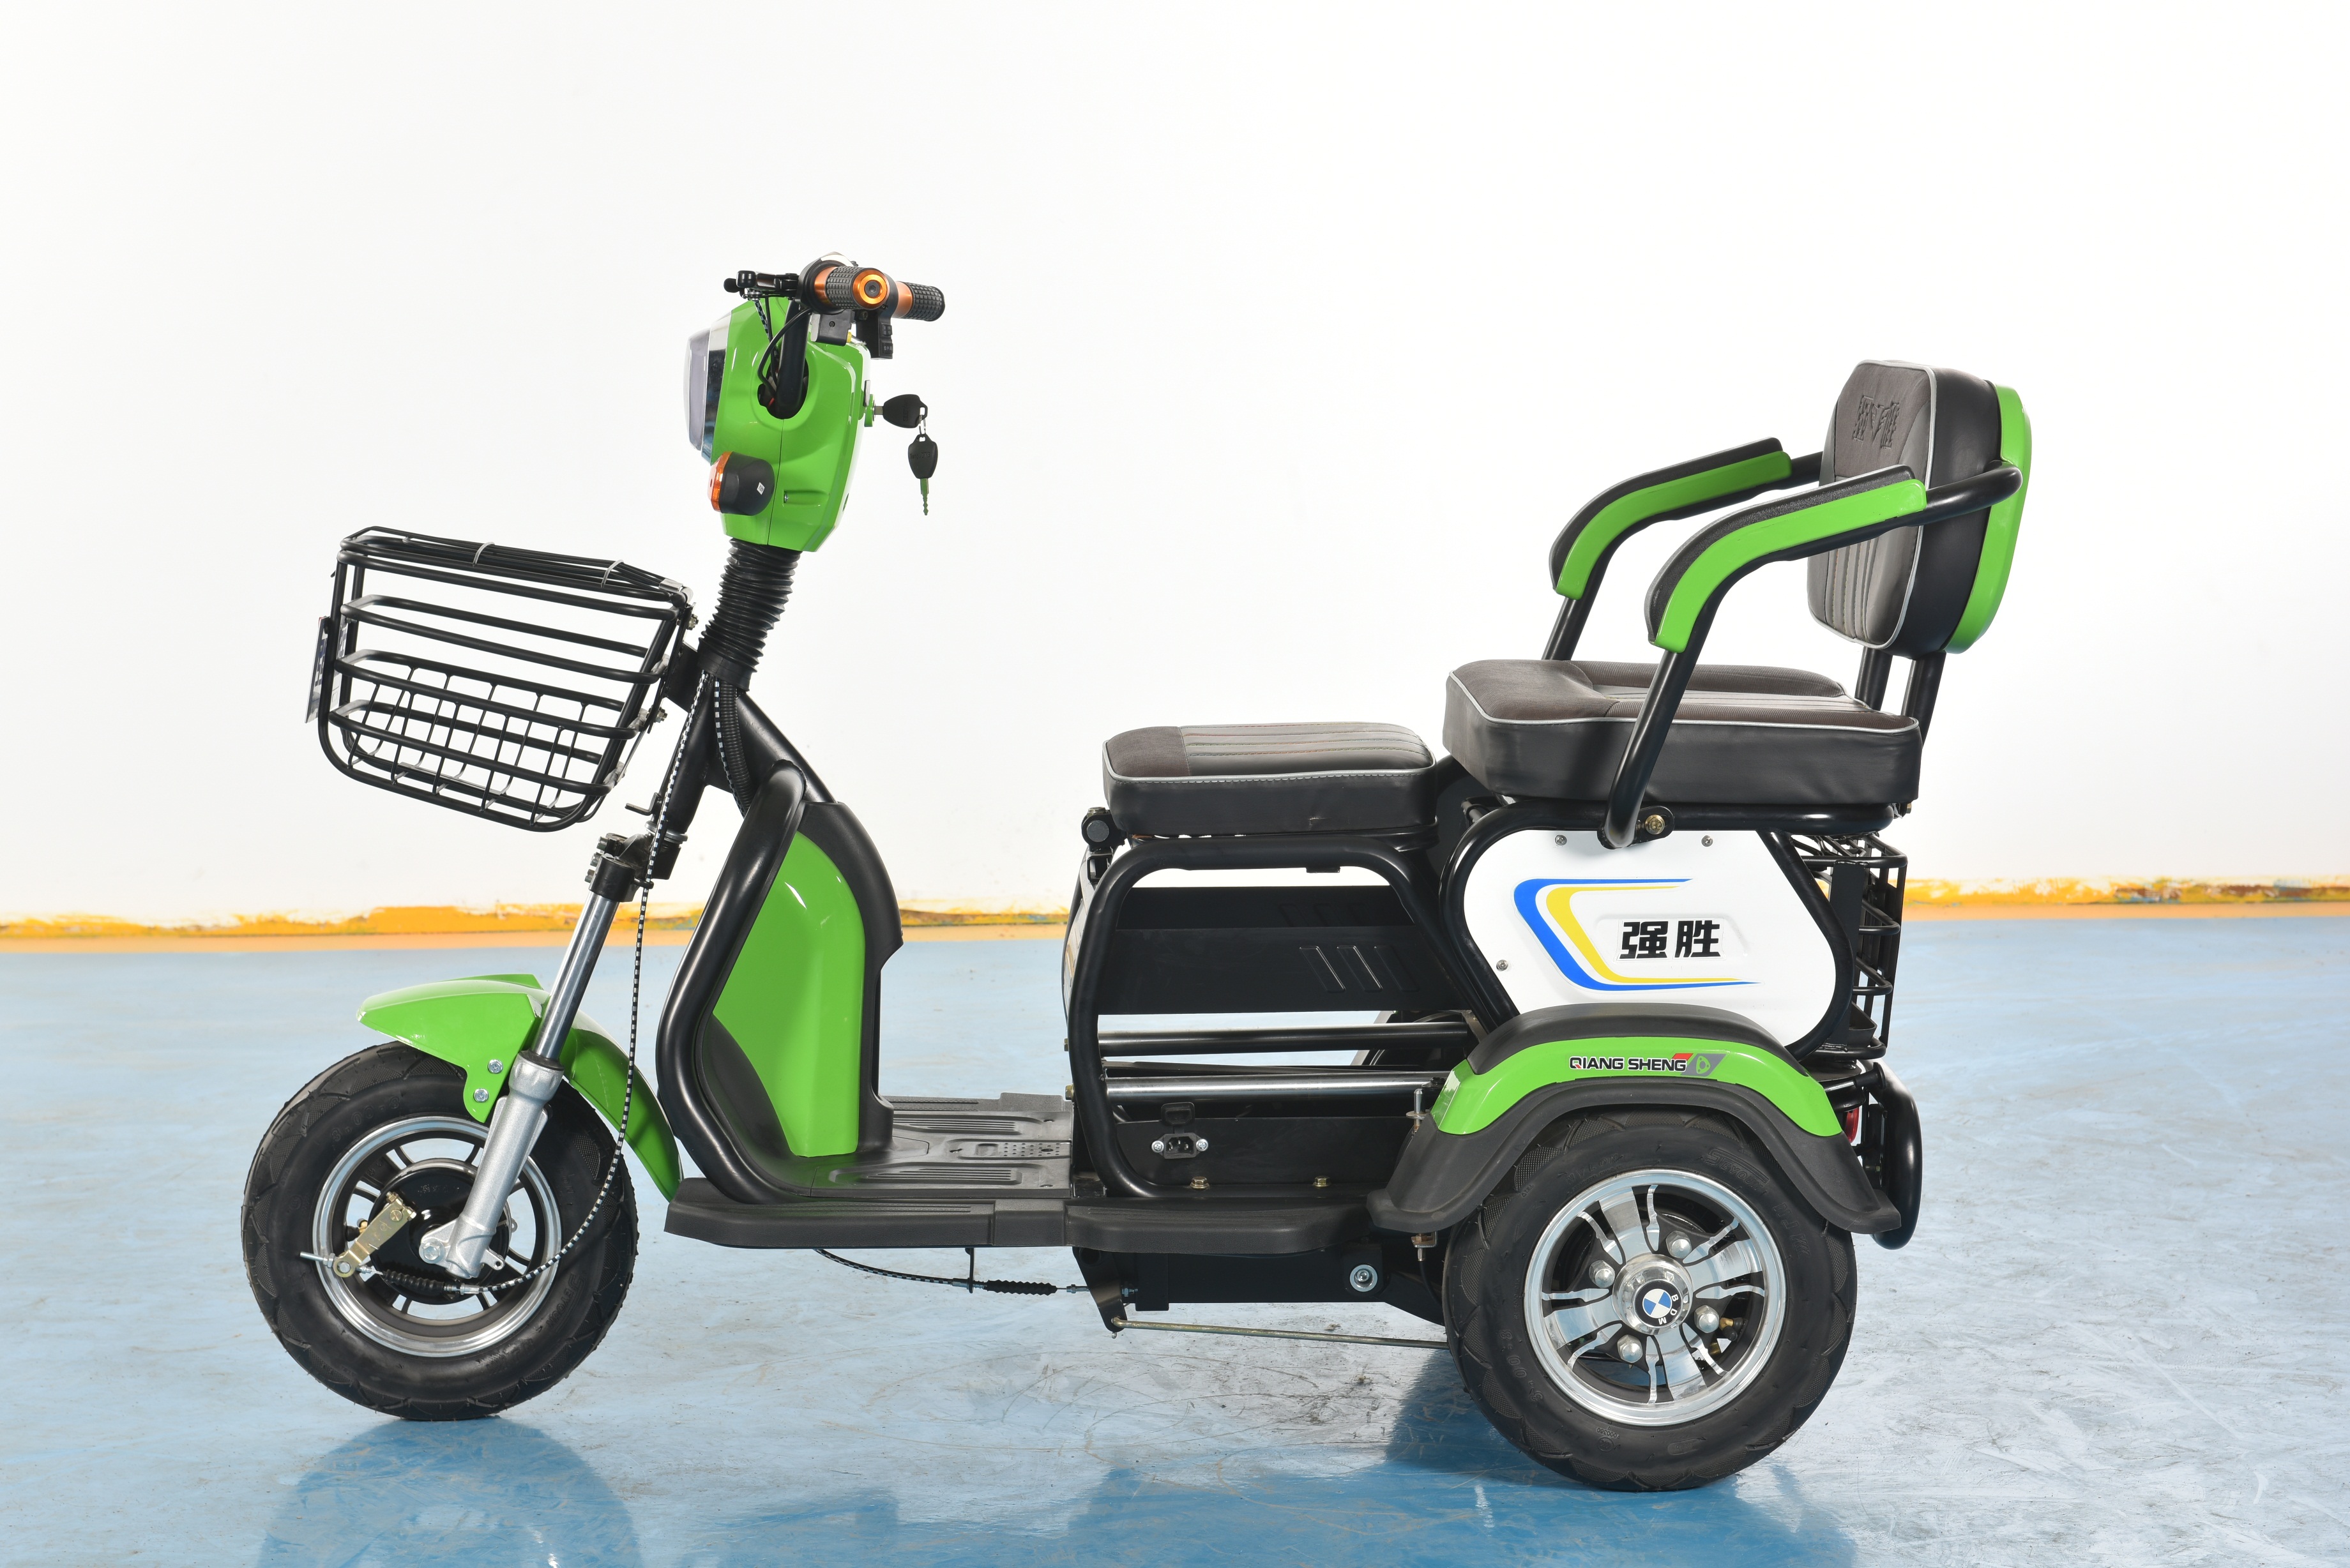 2020 The 48V 350W electric bicycle  hot sale and cheap  e bike in the eblike  market